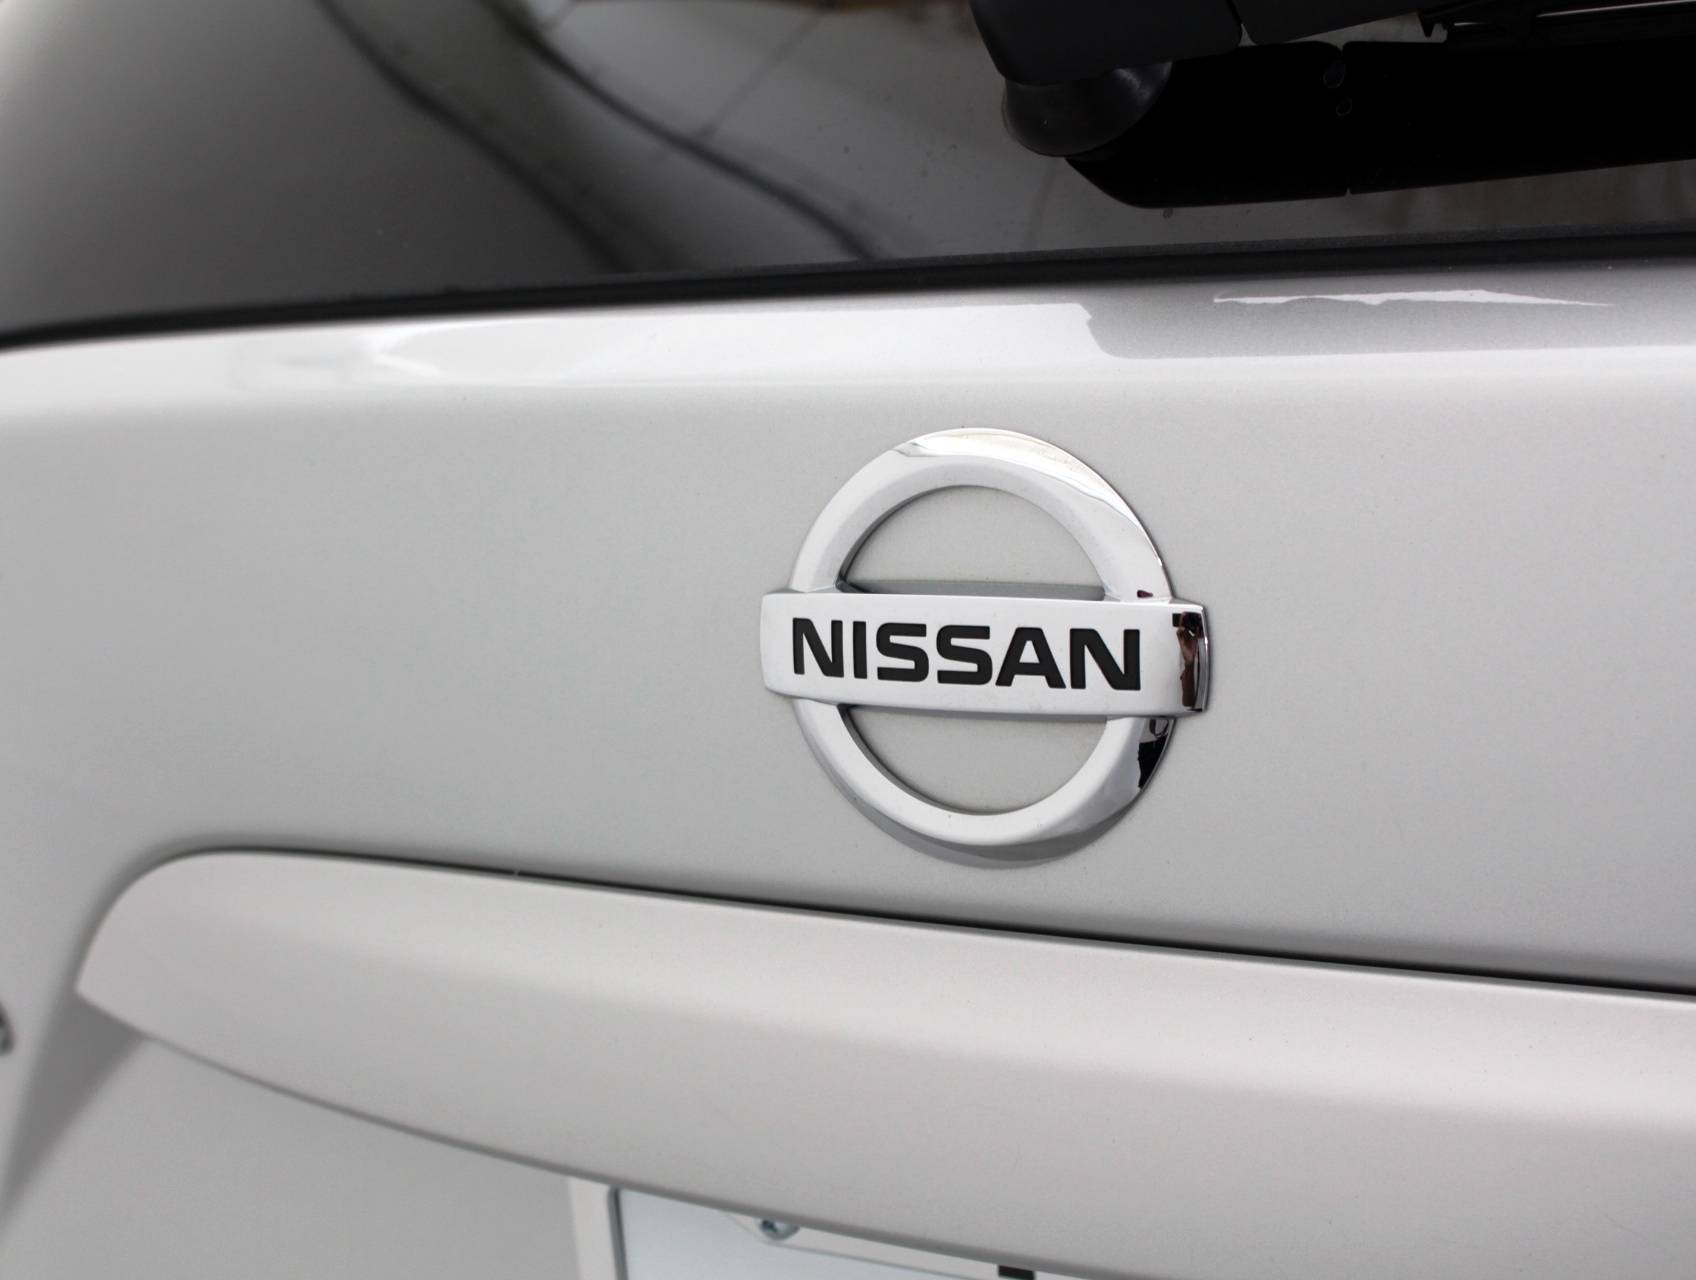 Florida Fine Cars - Used NISSAN MURANO 2016 WEST PALM S